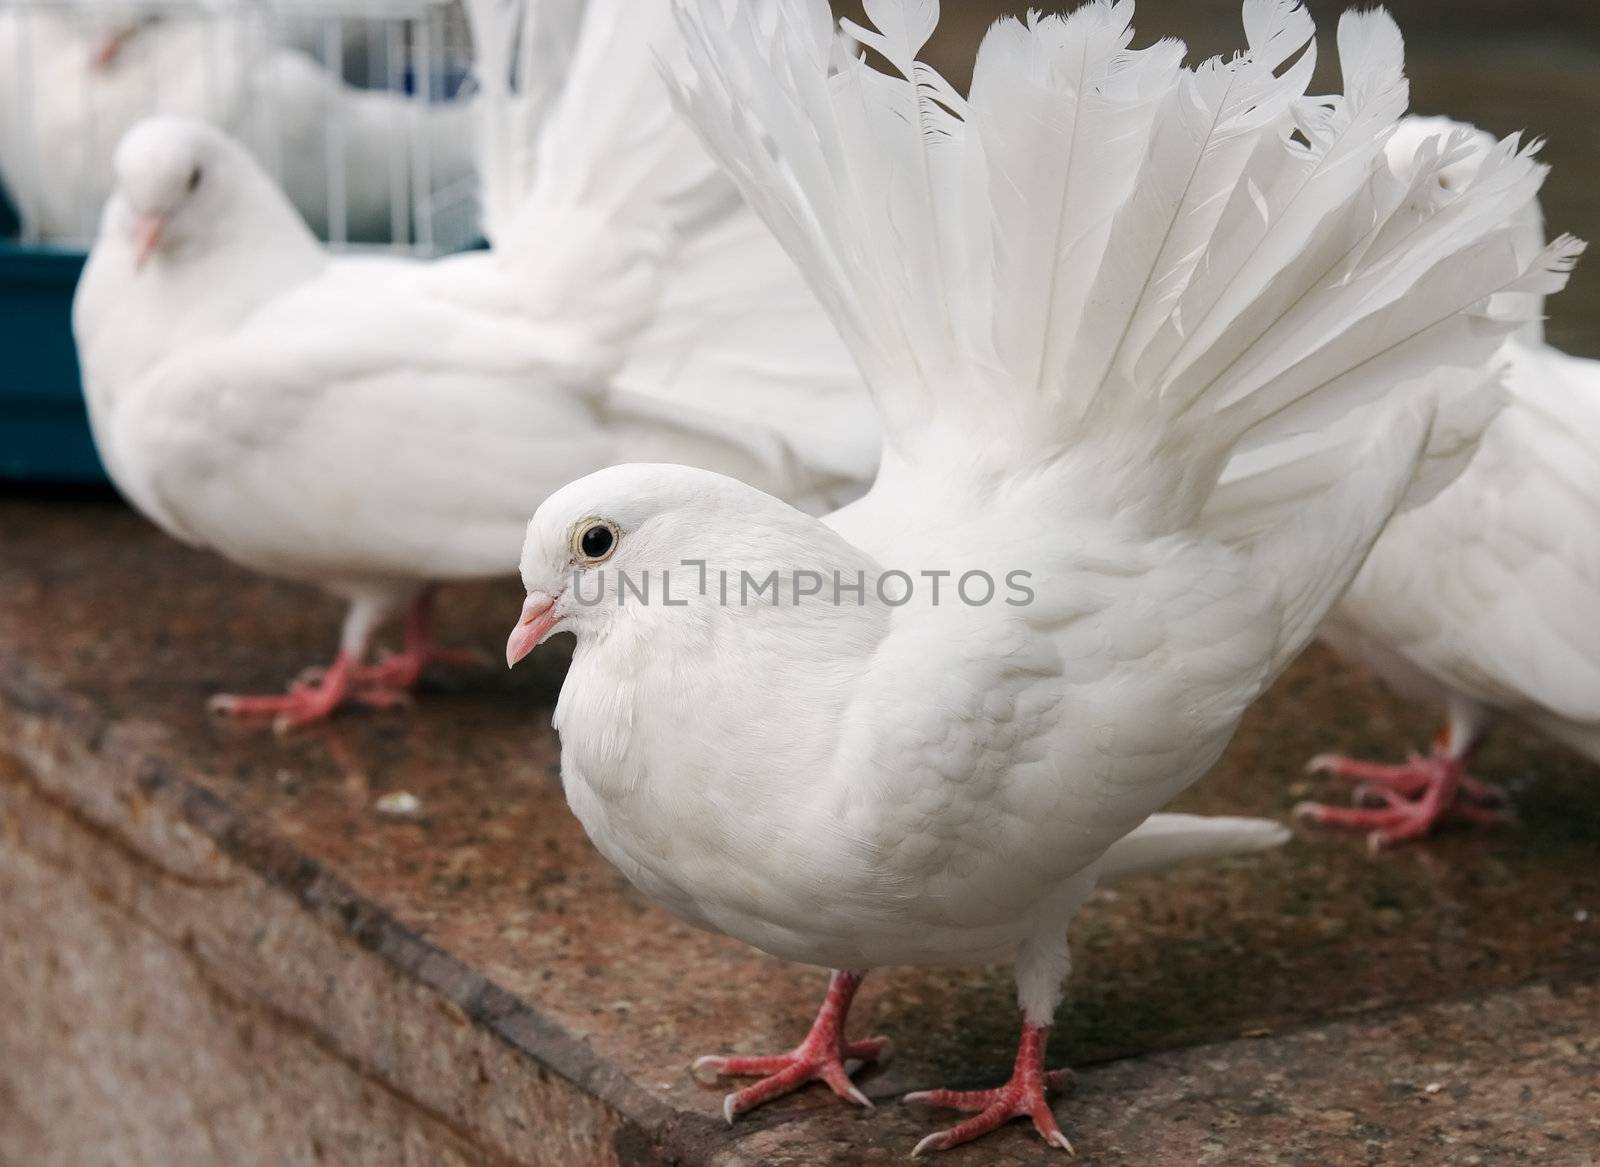 The decorative white pigeon with red paws